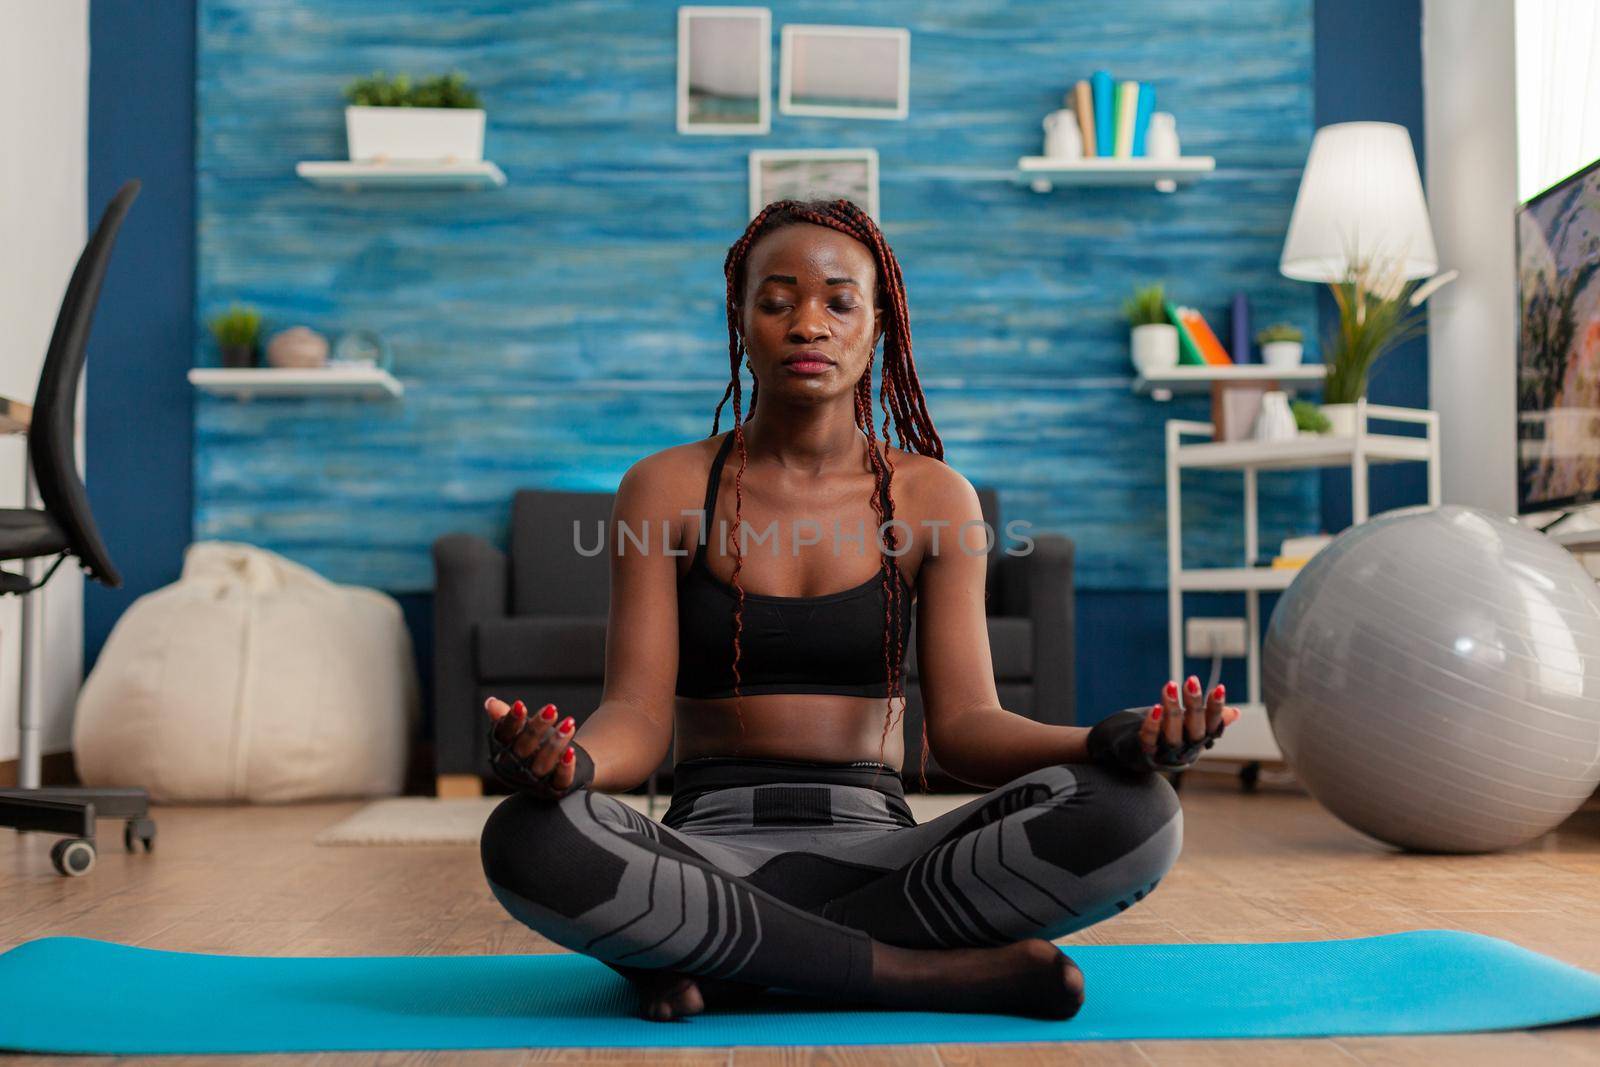 Calm tranquil black woman keeping eyes closed sitting on yoga mat, spending time on spirituality healthy lifestyle. Practicing meditating in lotus pose in home living room.